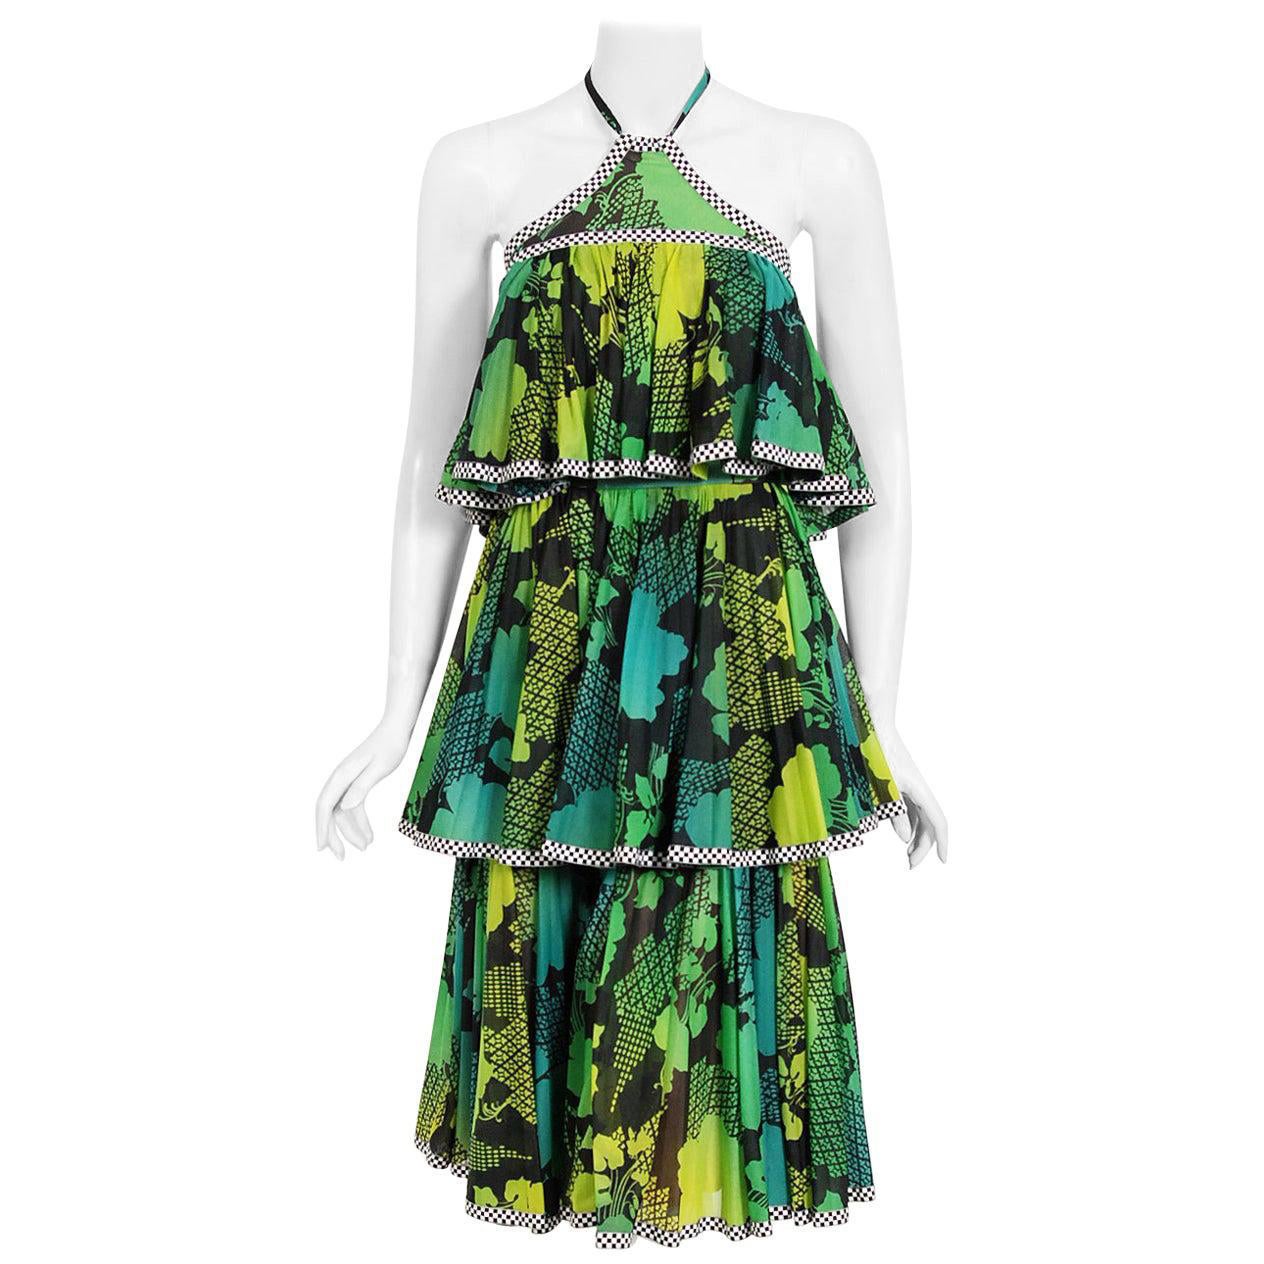 Vintage 1970's Jean Varon Green Graphic Floral Print Pleated Tiered Halter Dress